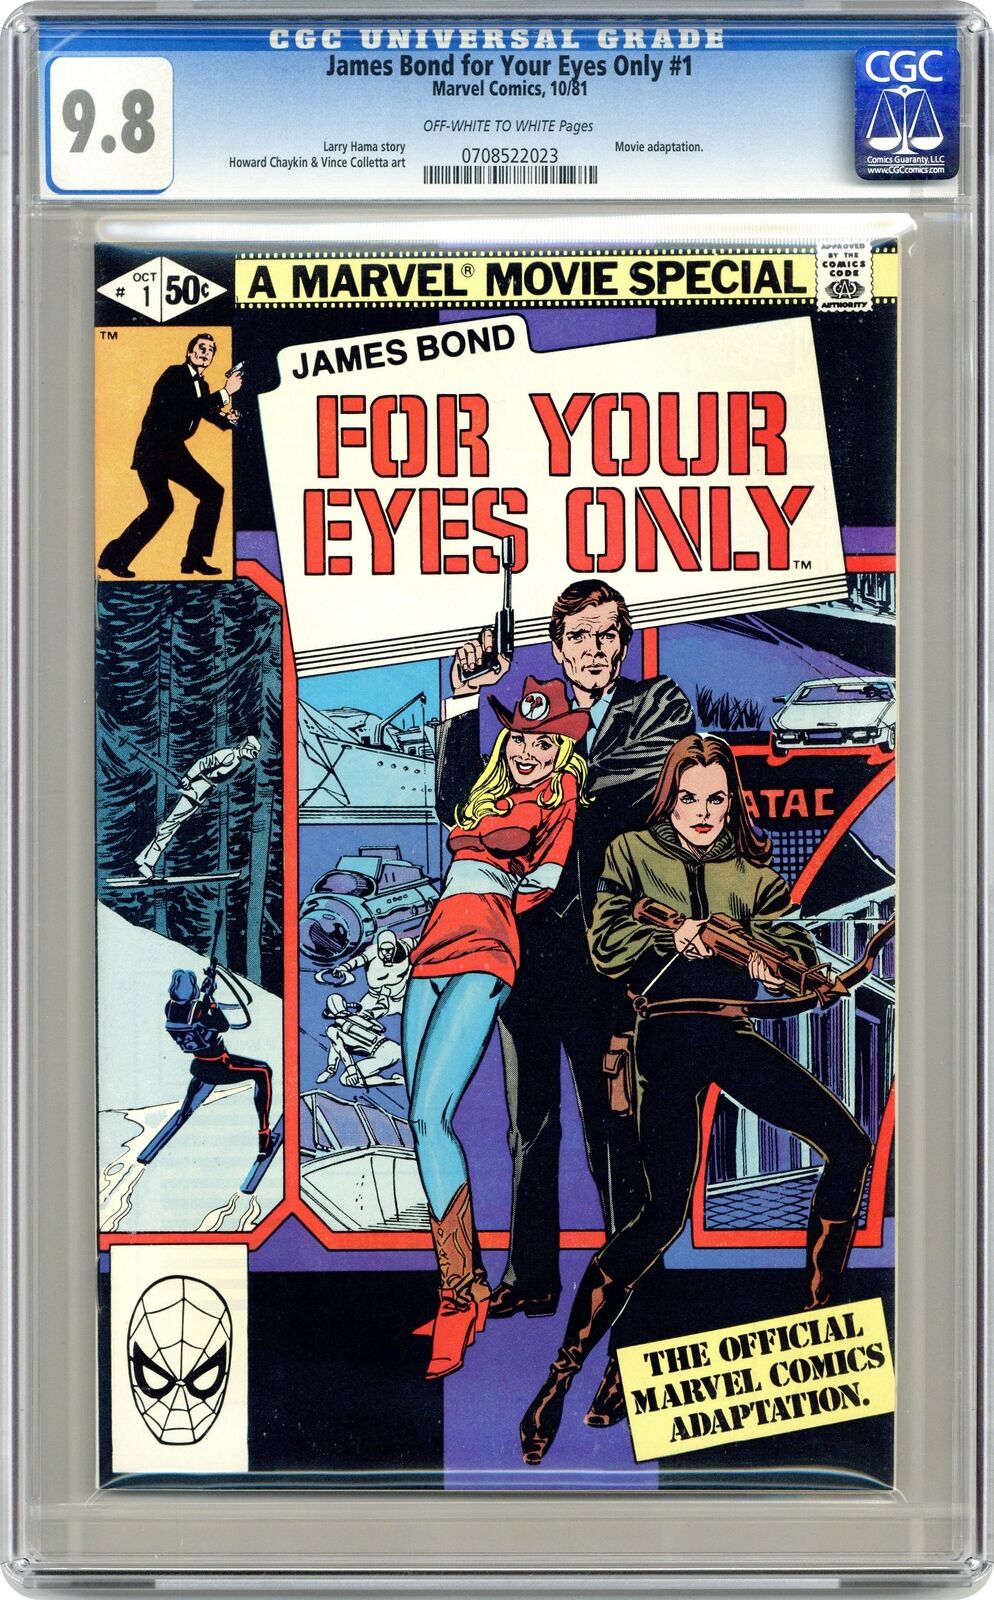 James Bond For Your Eyes Only #1 CGC 9.8 1981 0708522023